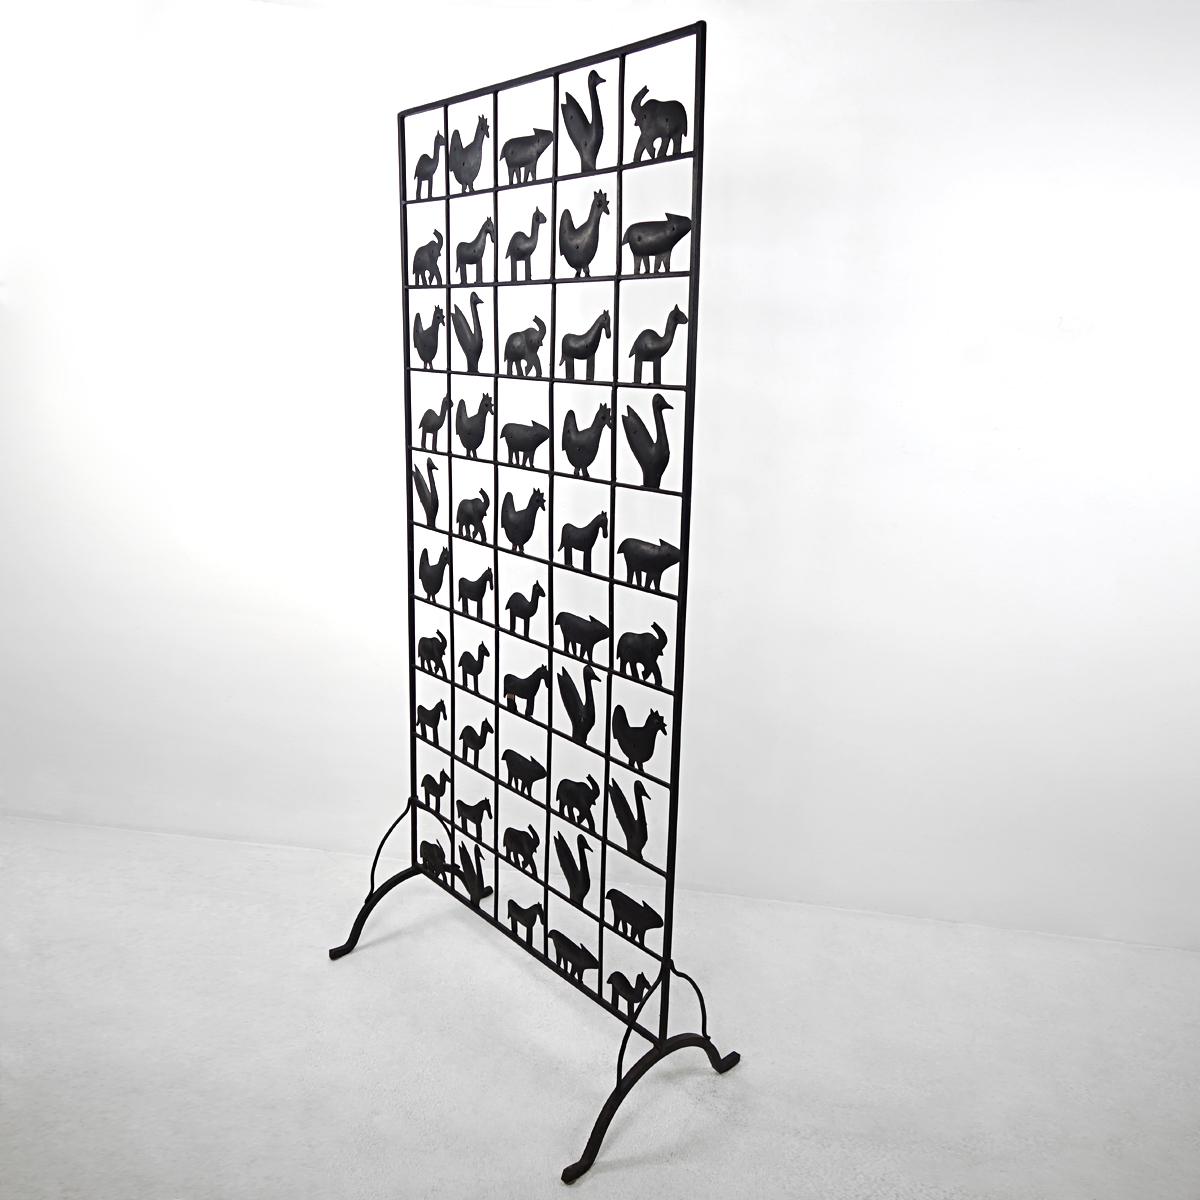 Very decorative screen or room divider made by hand Atelier de Marolles in the 1950s. 
The screen is made of wrought iron and is decorated with 50 animal figurines.